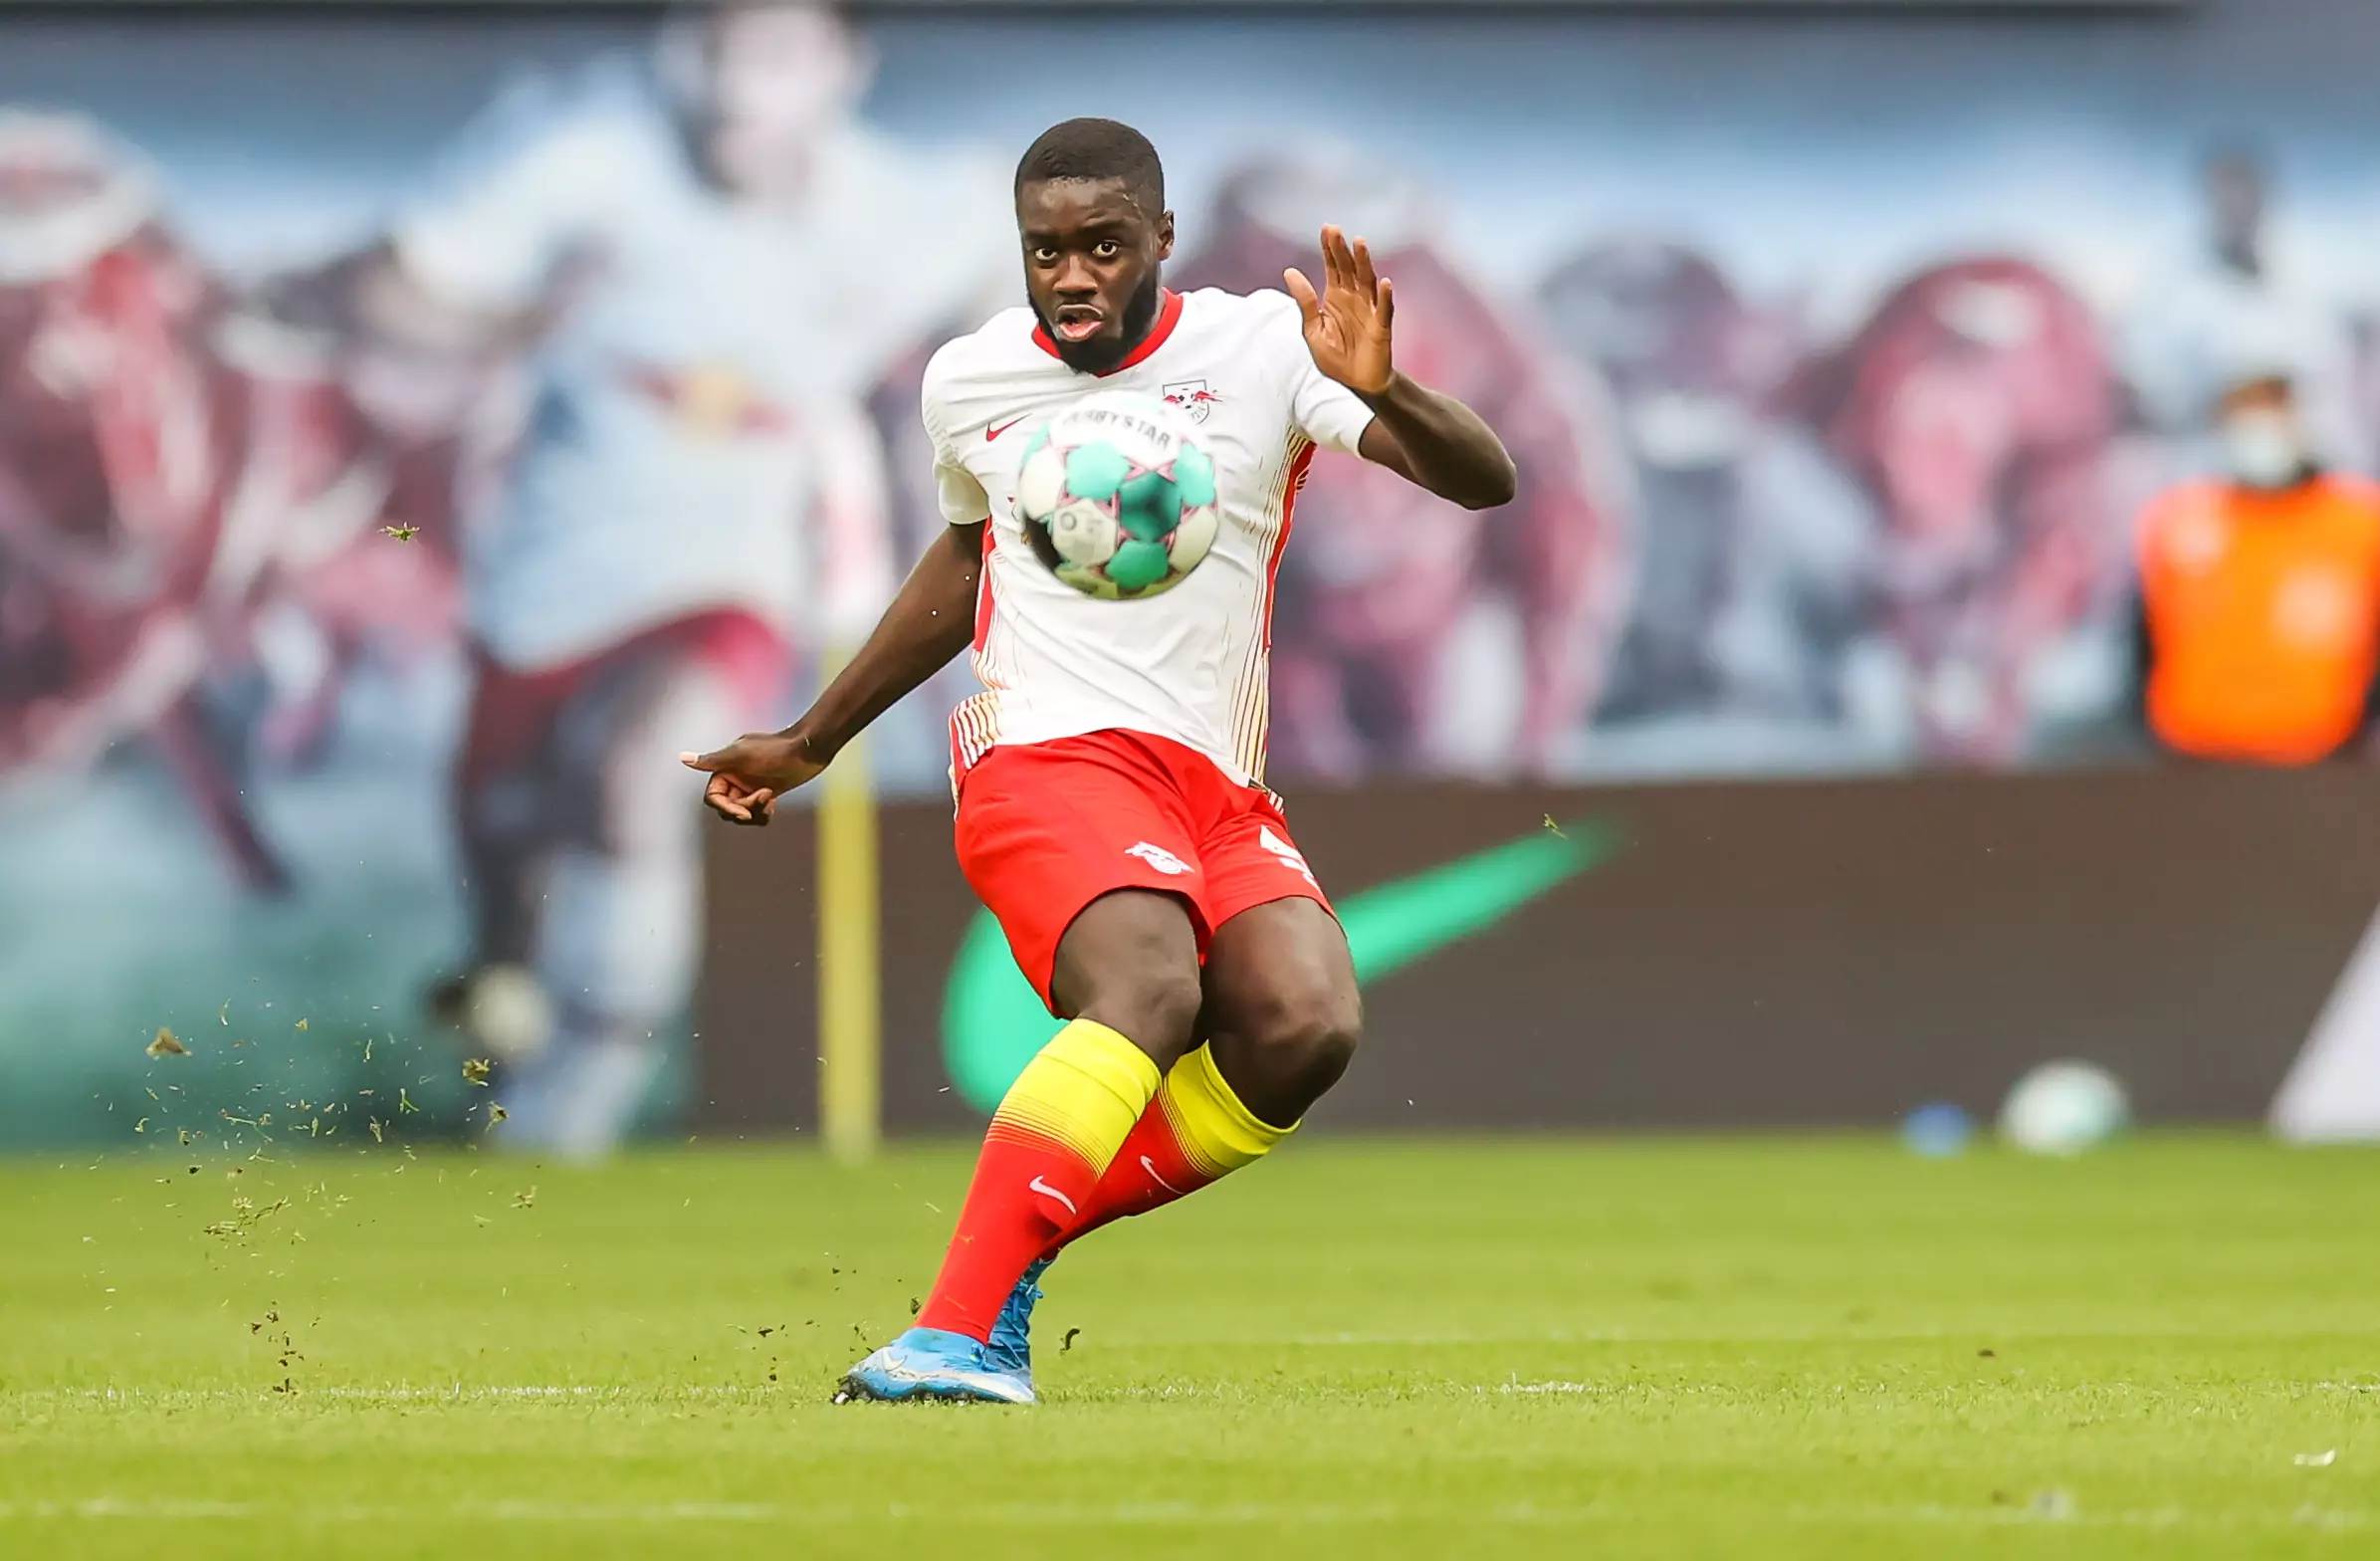 RB Leipzig's most valuable player Upamecano is leaving for Bayern Munich. Image: PA Images